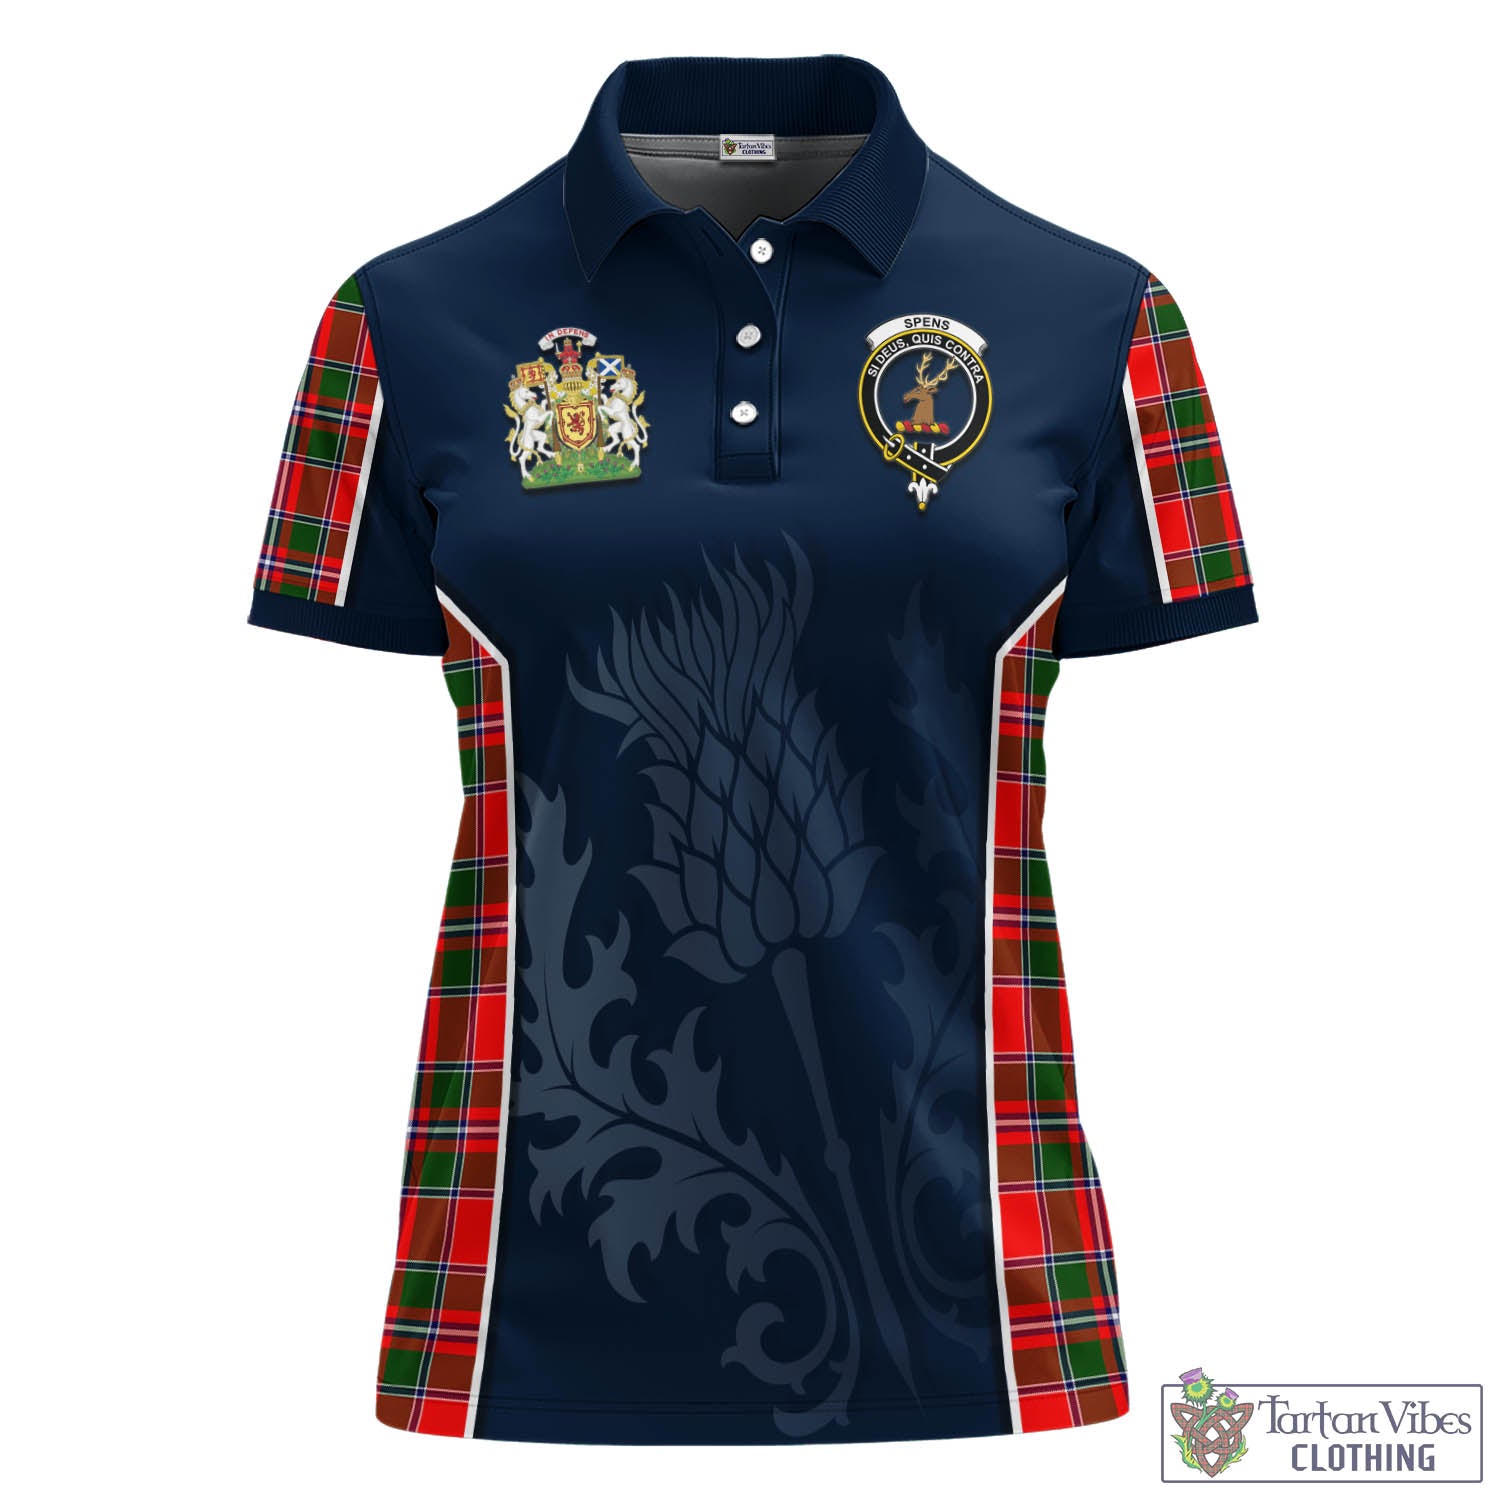 Tartan Vibes Clothing Spens Modern Tartan Women's Polo Shirt with Family Crest and Scottish Thistle Vibes Sport Style